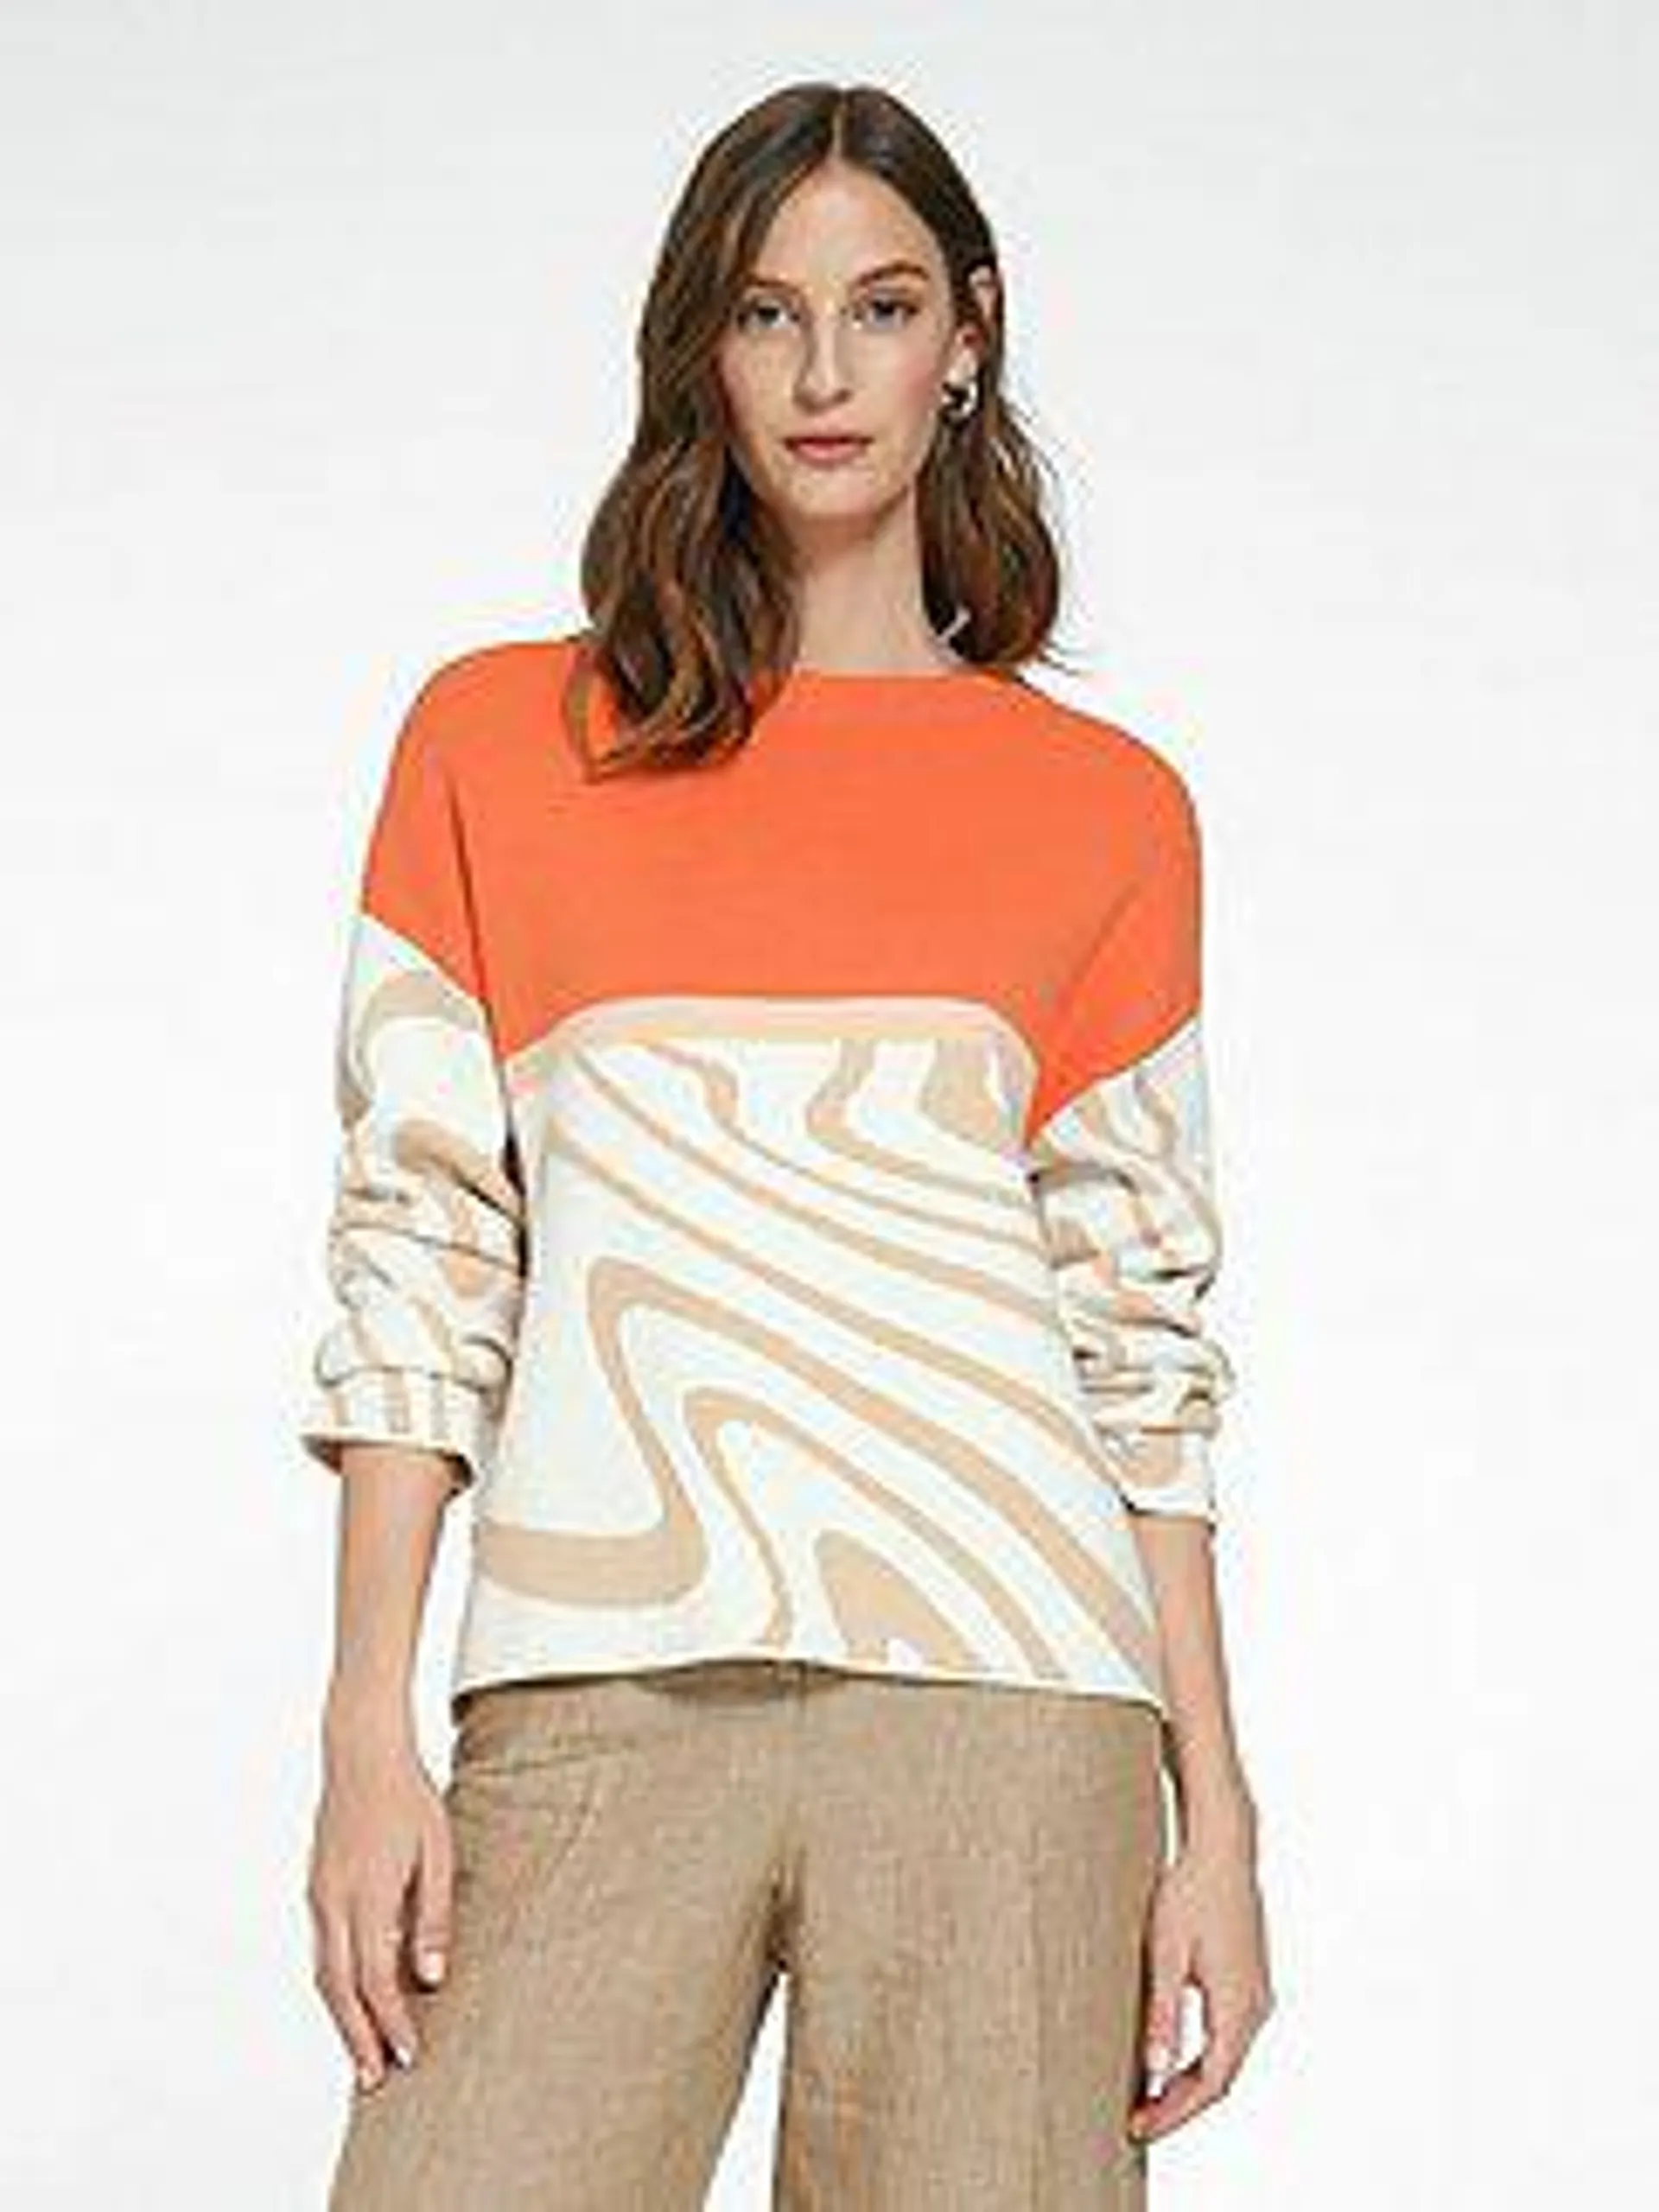 Round neck jumper with long sleeves